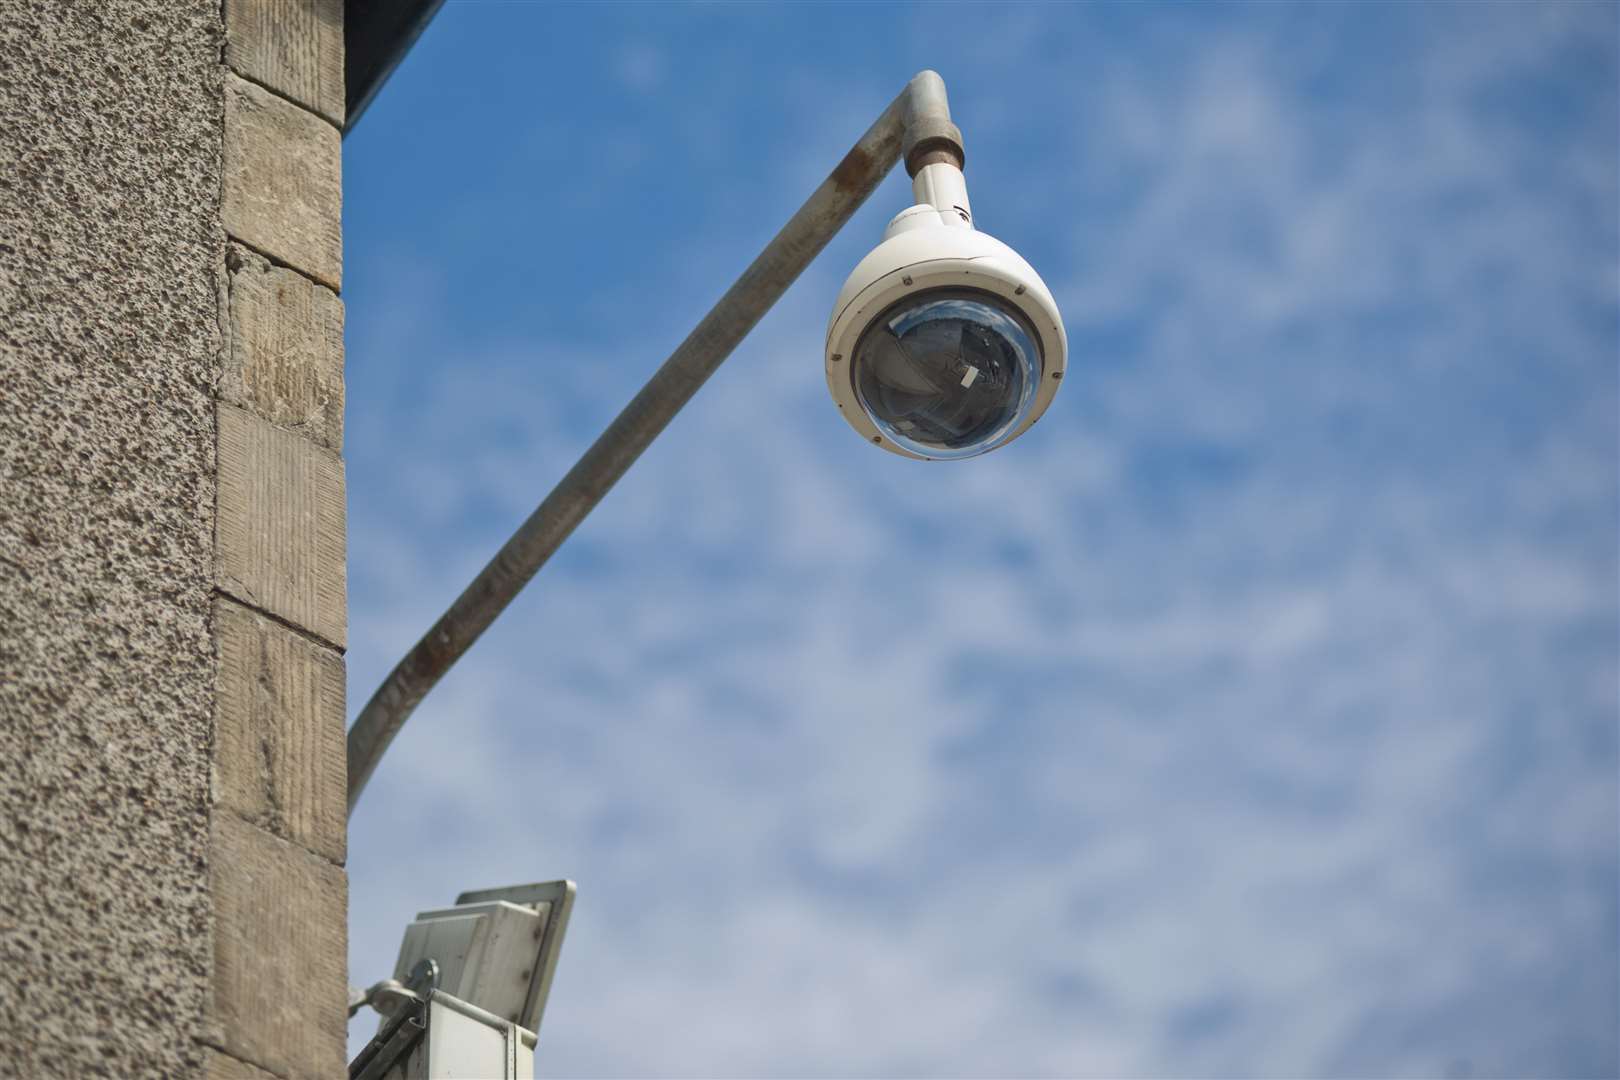 A trial is proposed which aims to improve Moray's public space CCTV system. Picture: Daniel Forsyth